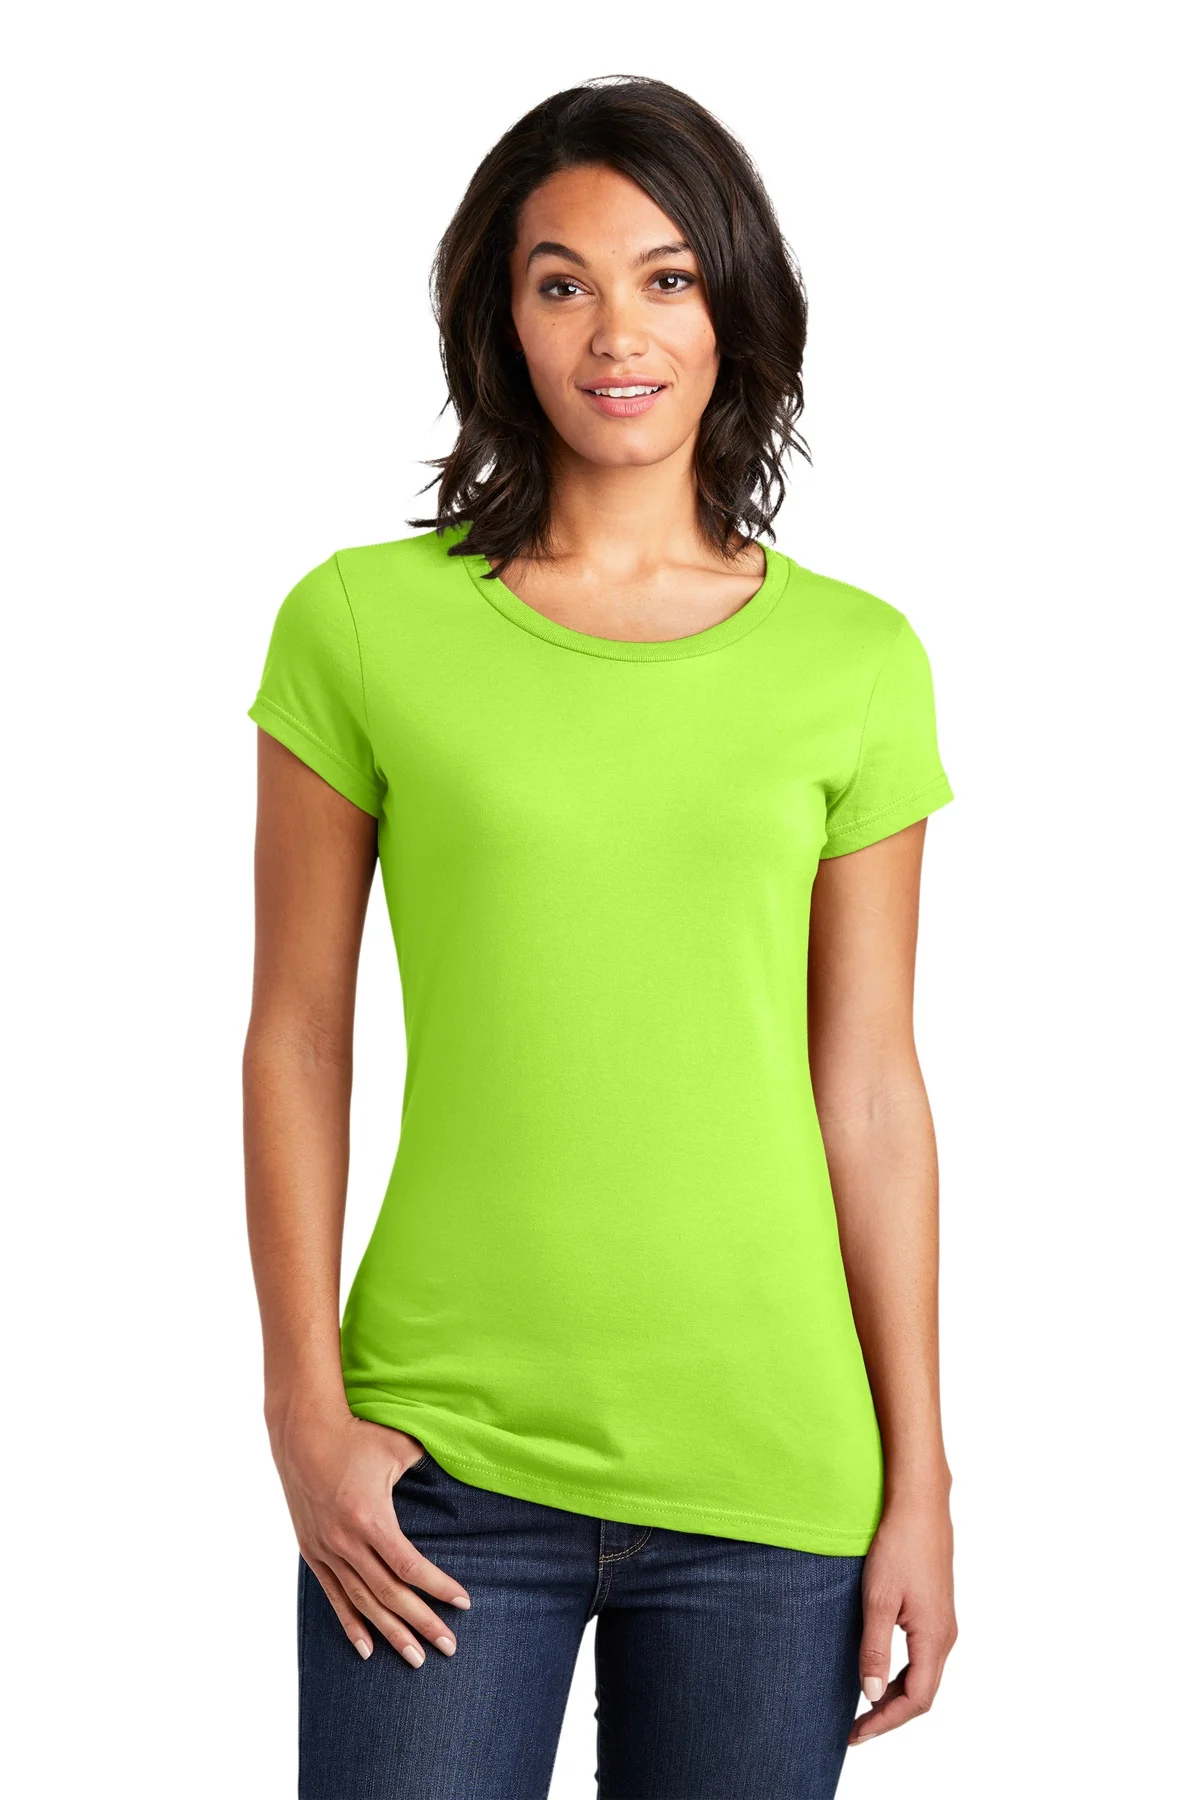 District DT6001 Juniors Very Important Tee , Lime Shock, XXL